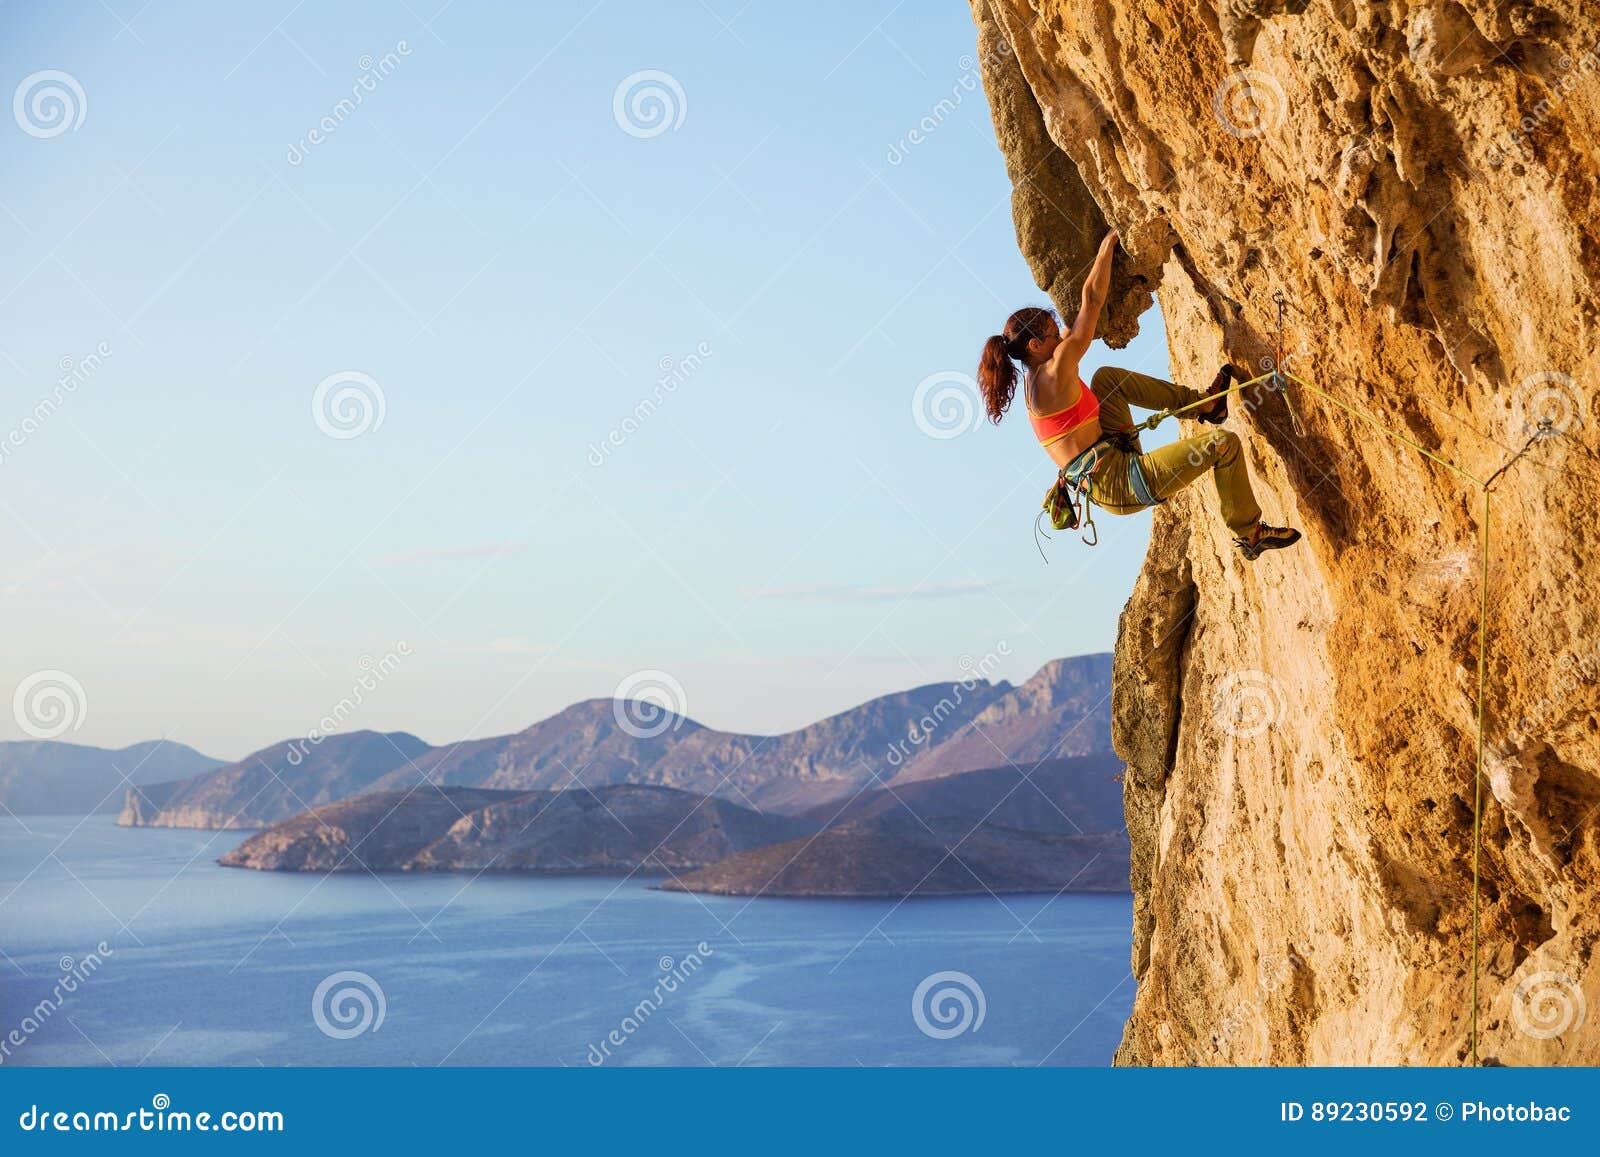 female rock climber on challenging route on cliff, view of coast